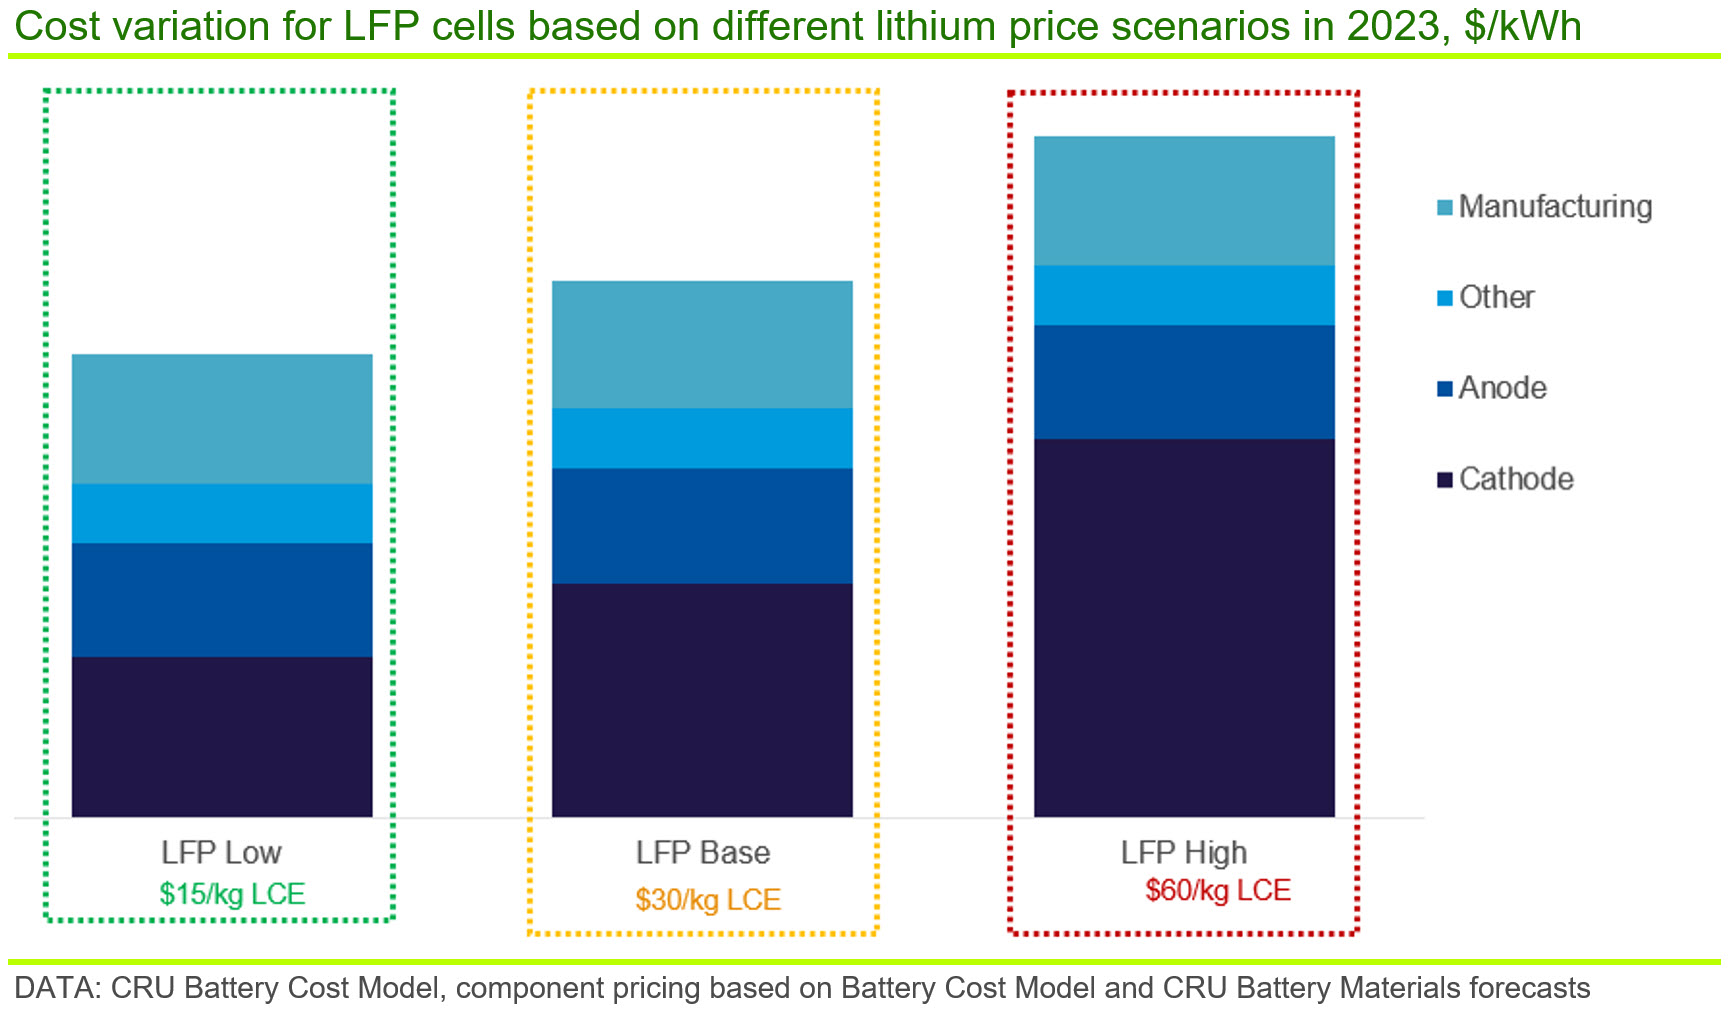 Graph showing cost variation for LFP cells based on different lithium price scenarios in 2023